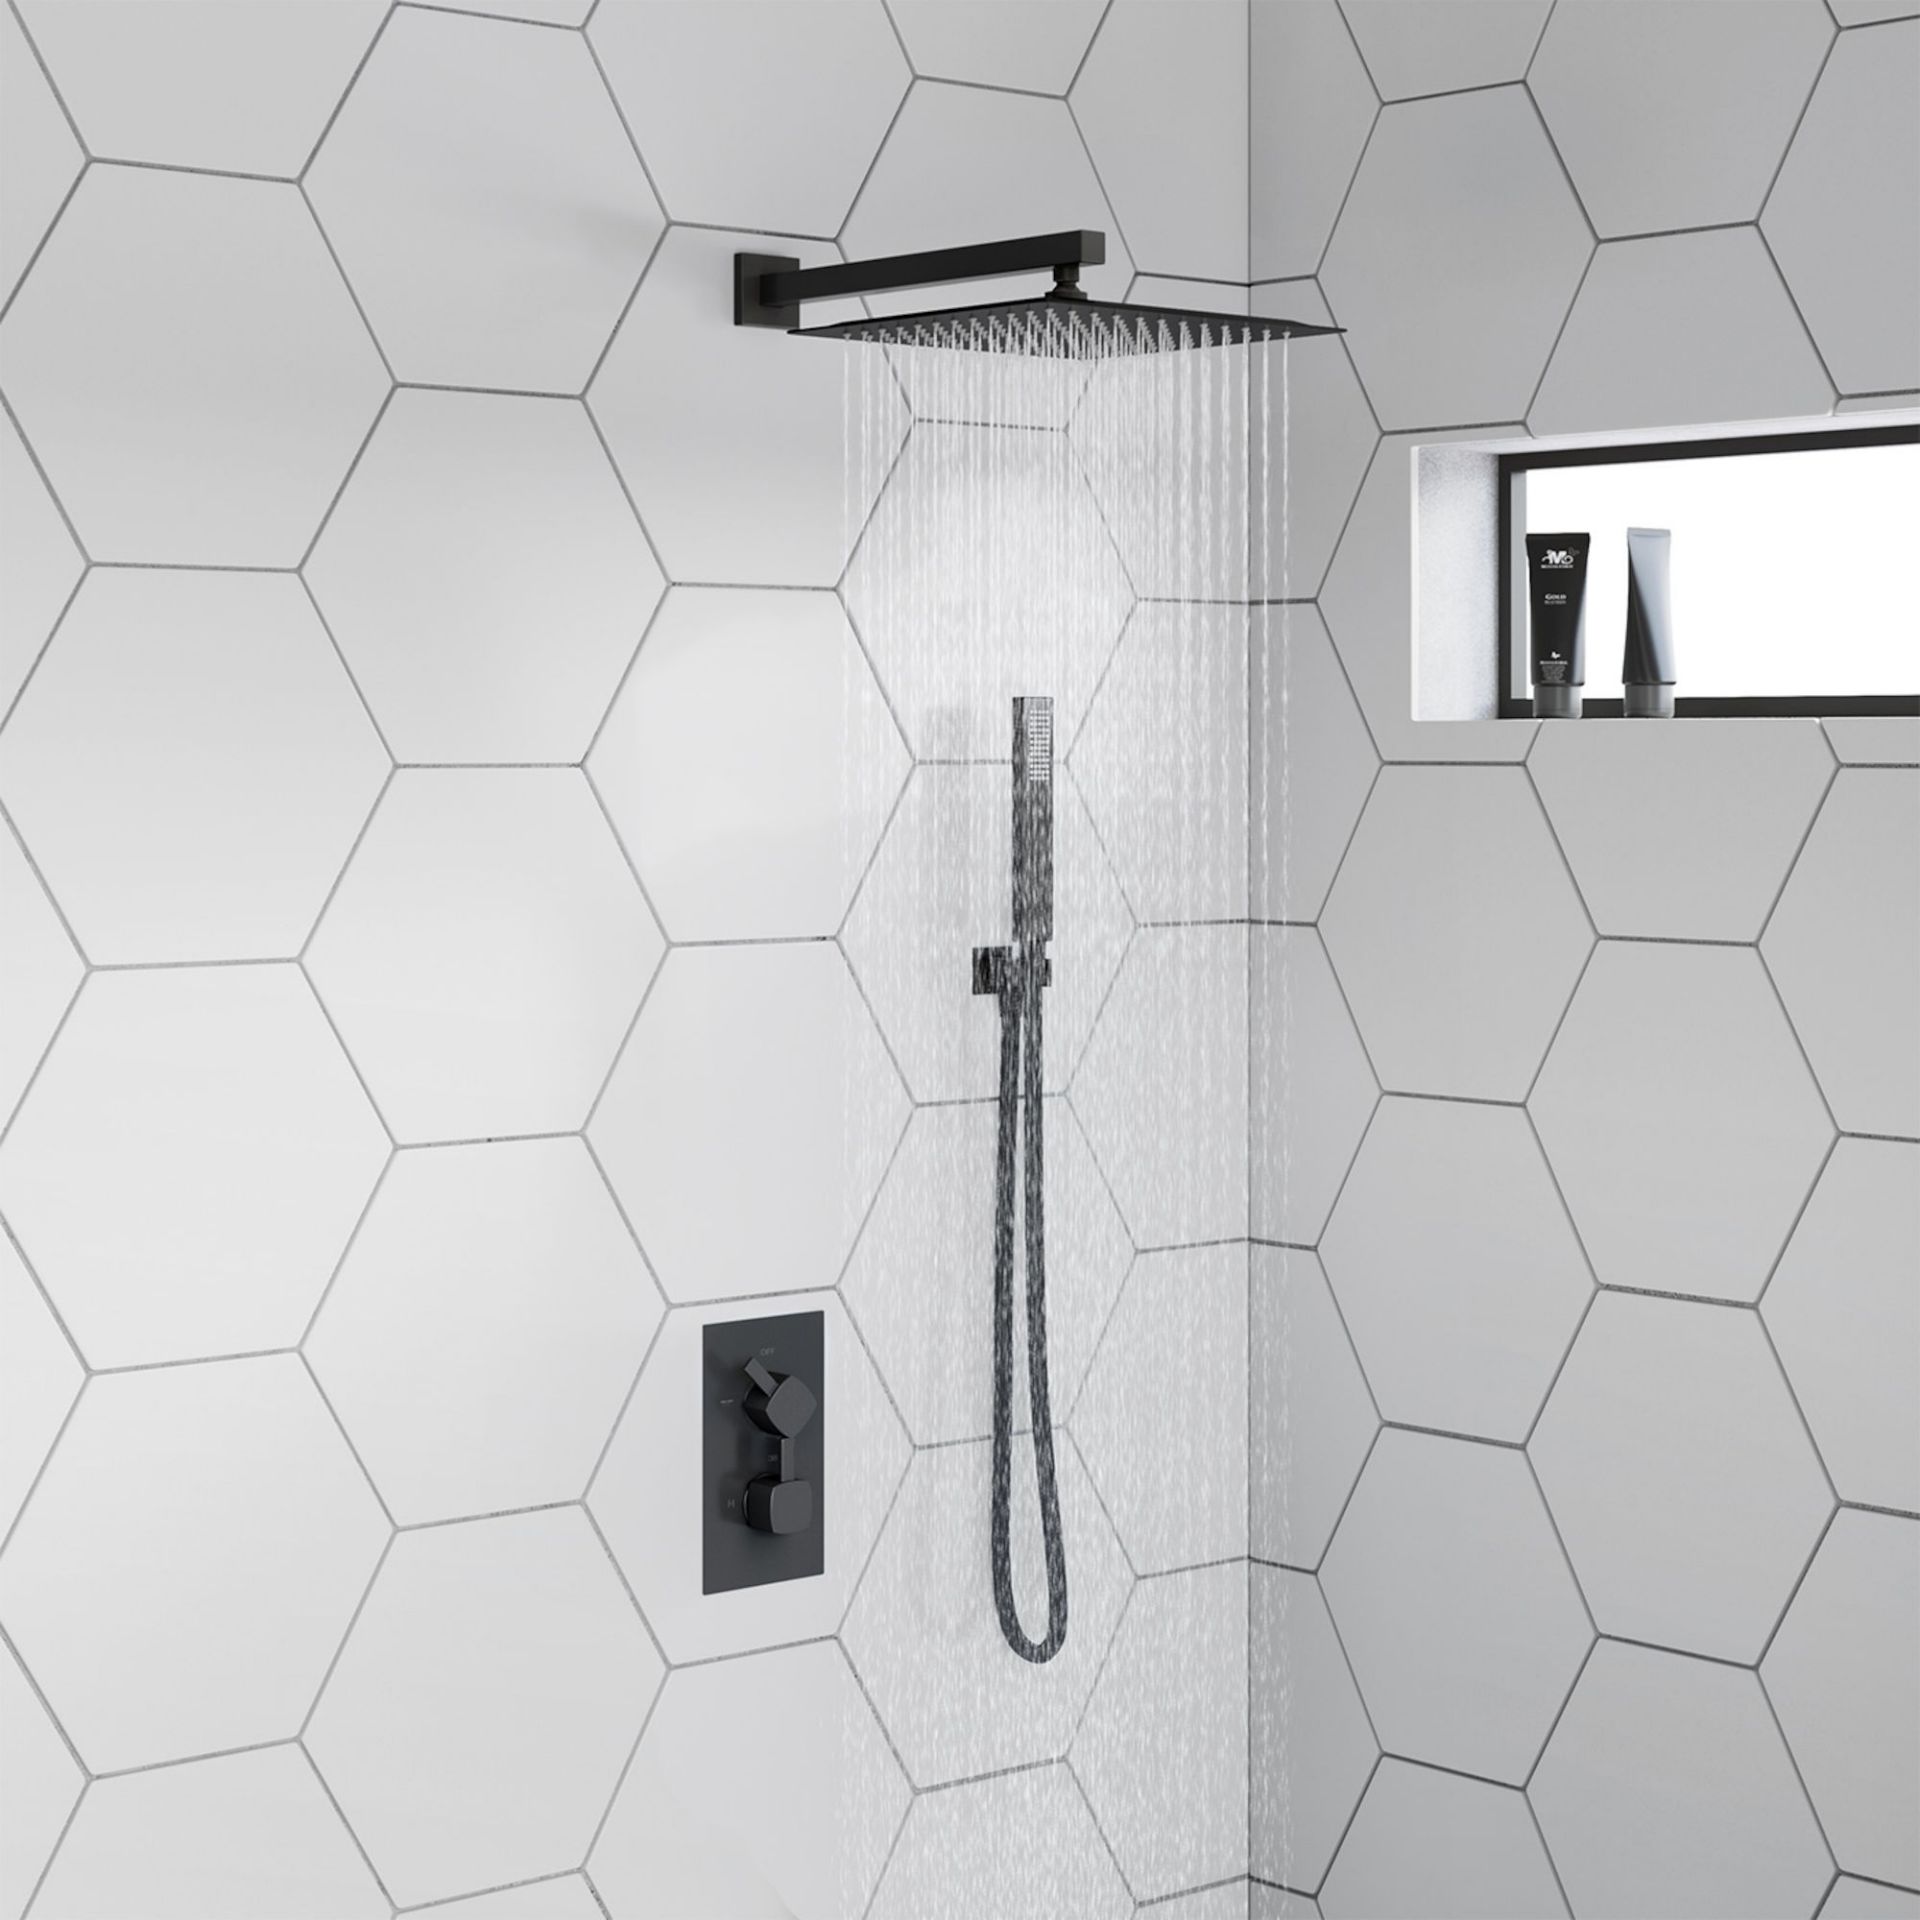 (ZL38) Matte Black Square Concealed Thermostatic Mixer Shower Kit & Large Head. RRP £474.99.